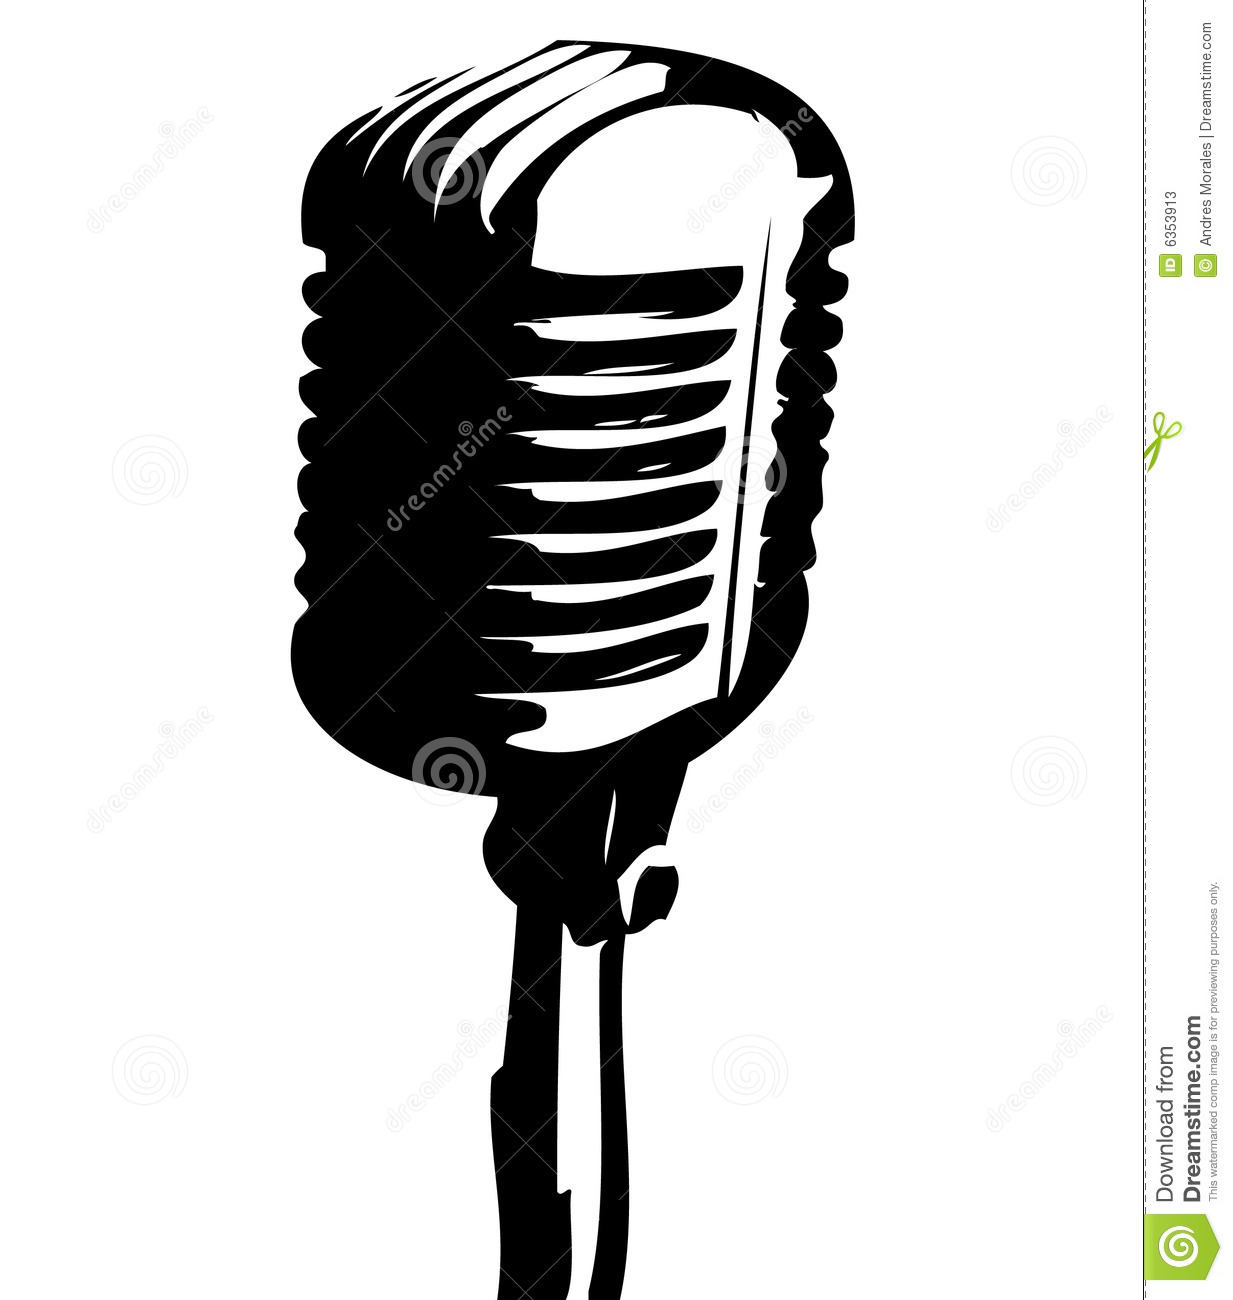     Clipart Microphone Displaying 16 Images For Clipart Microphone Toolbar